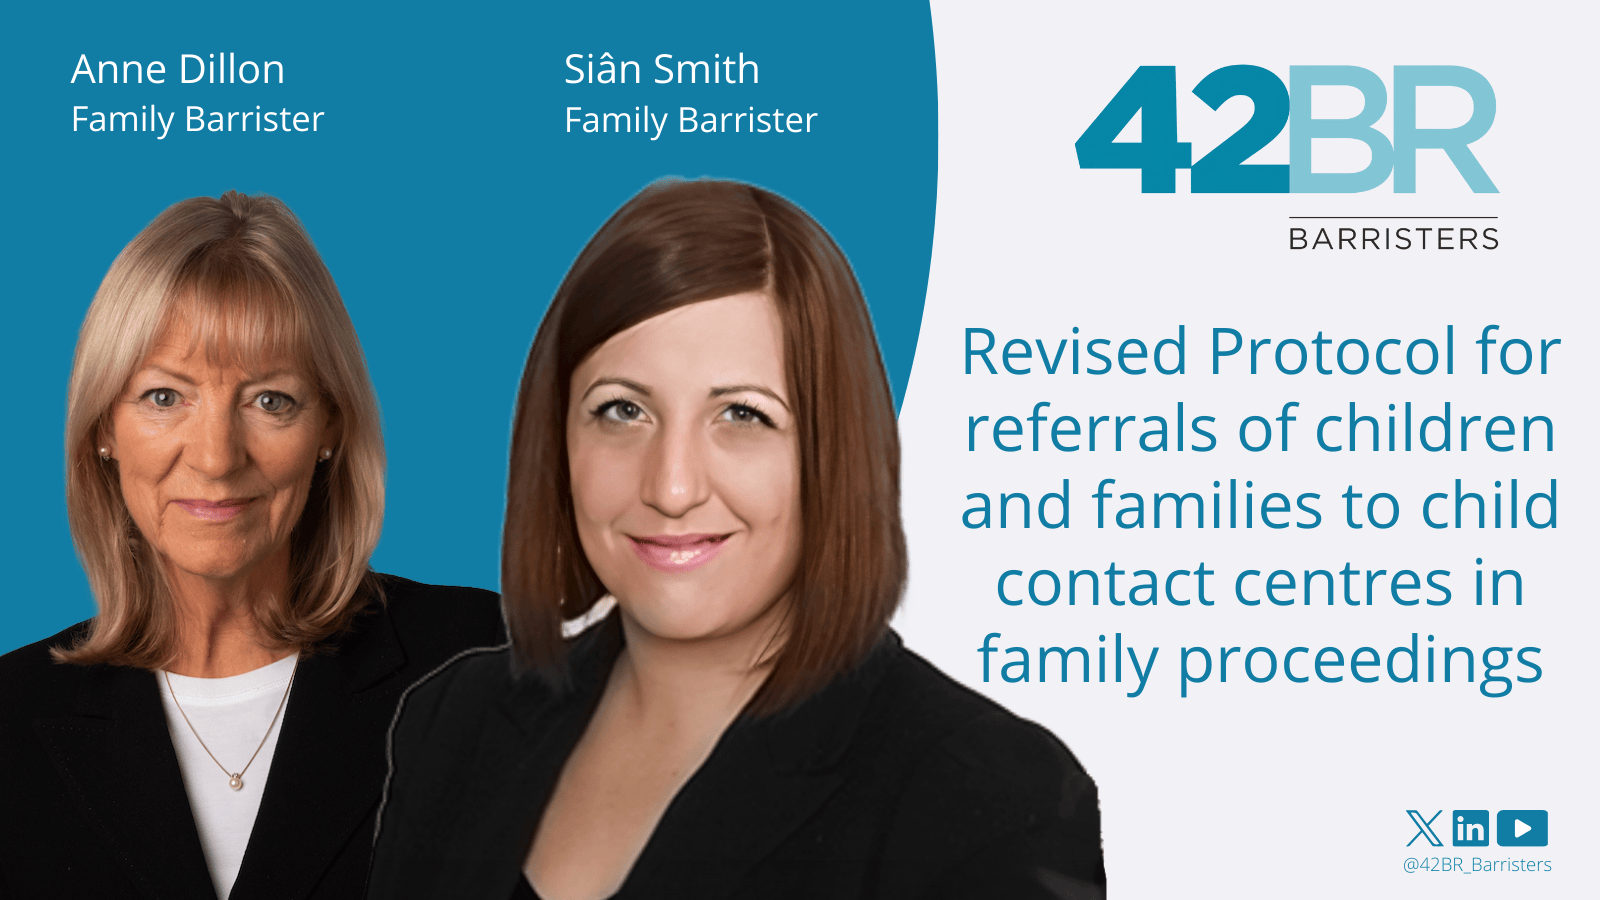 Revised Protocol for referrals of children and families to child contact centres in family proceedings (endorsed by Sir Andrew McFarlane, President of the Family Division)